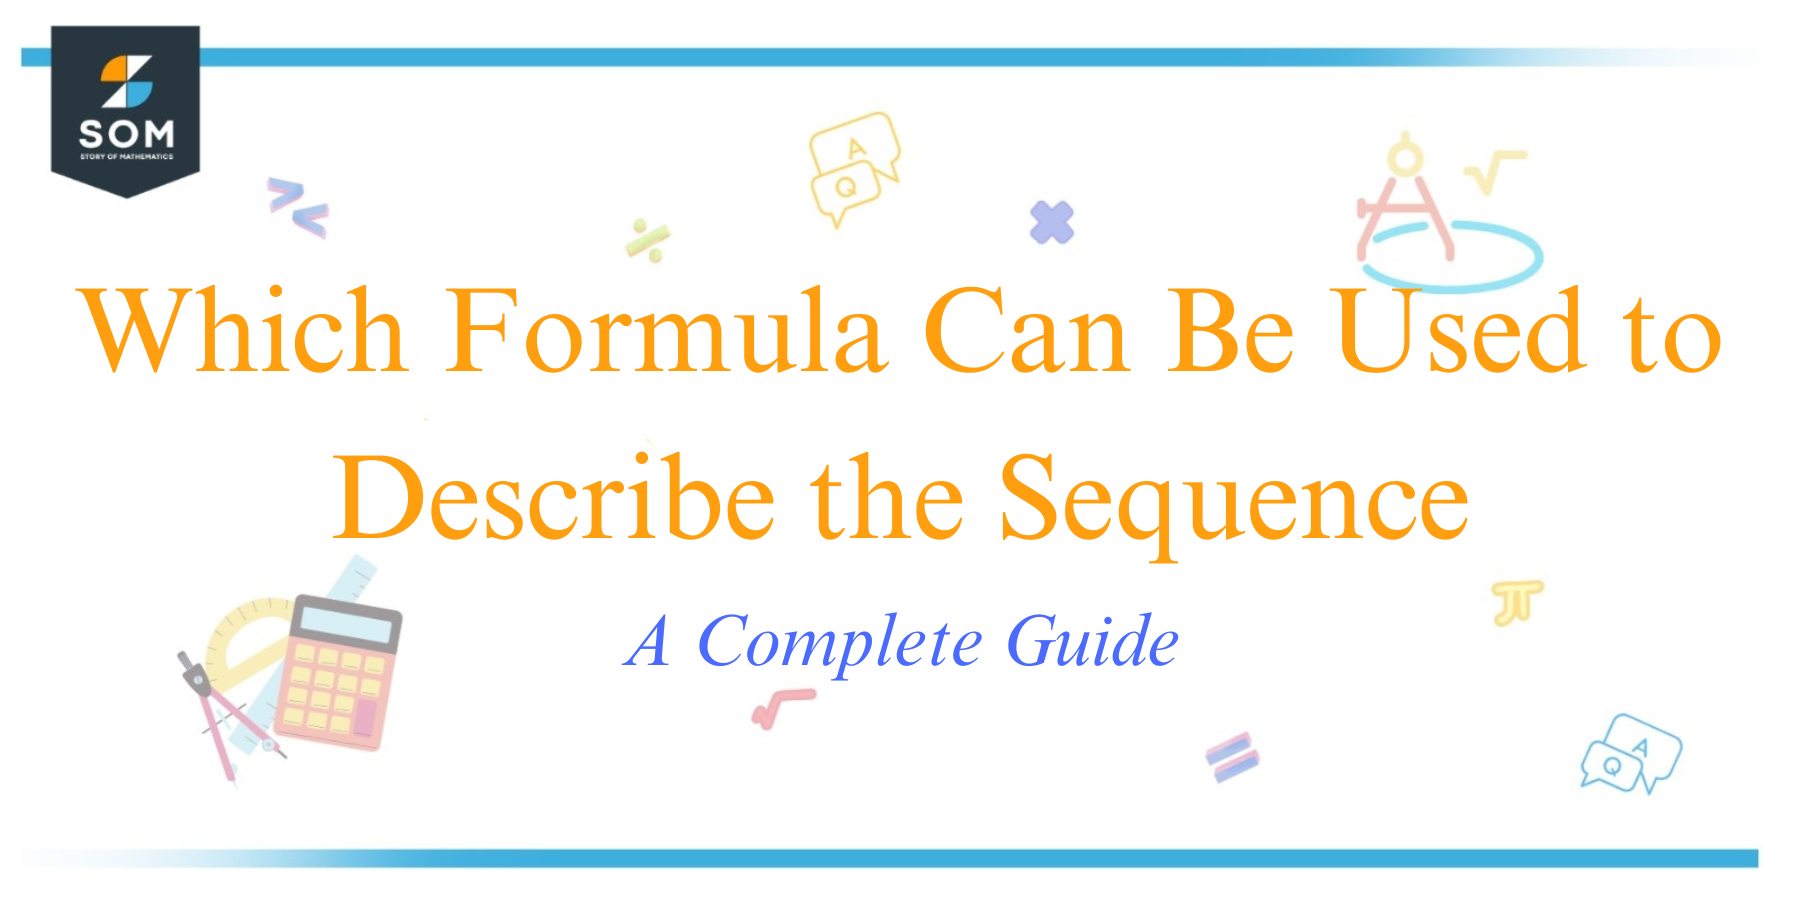 Which Formula Can Be Used to Describe the Sequence A Complete Guide